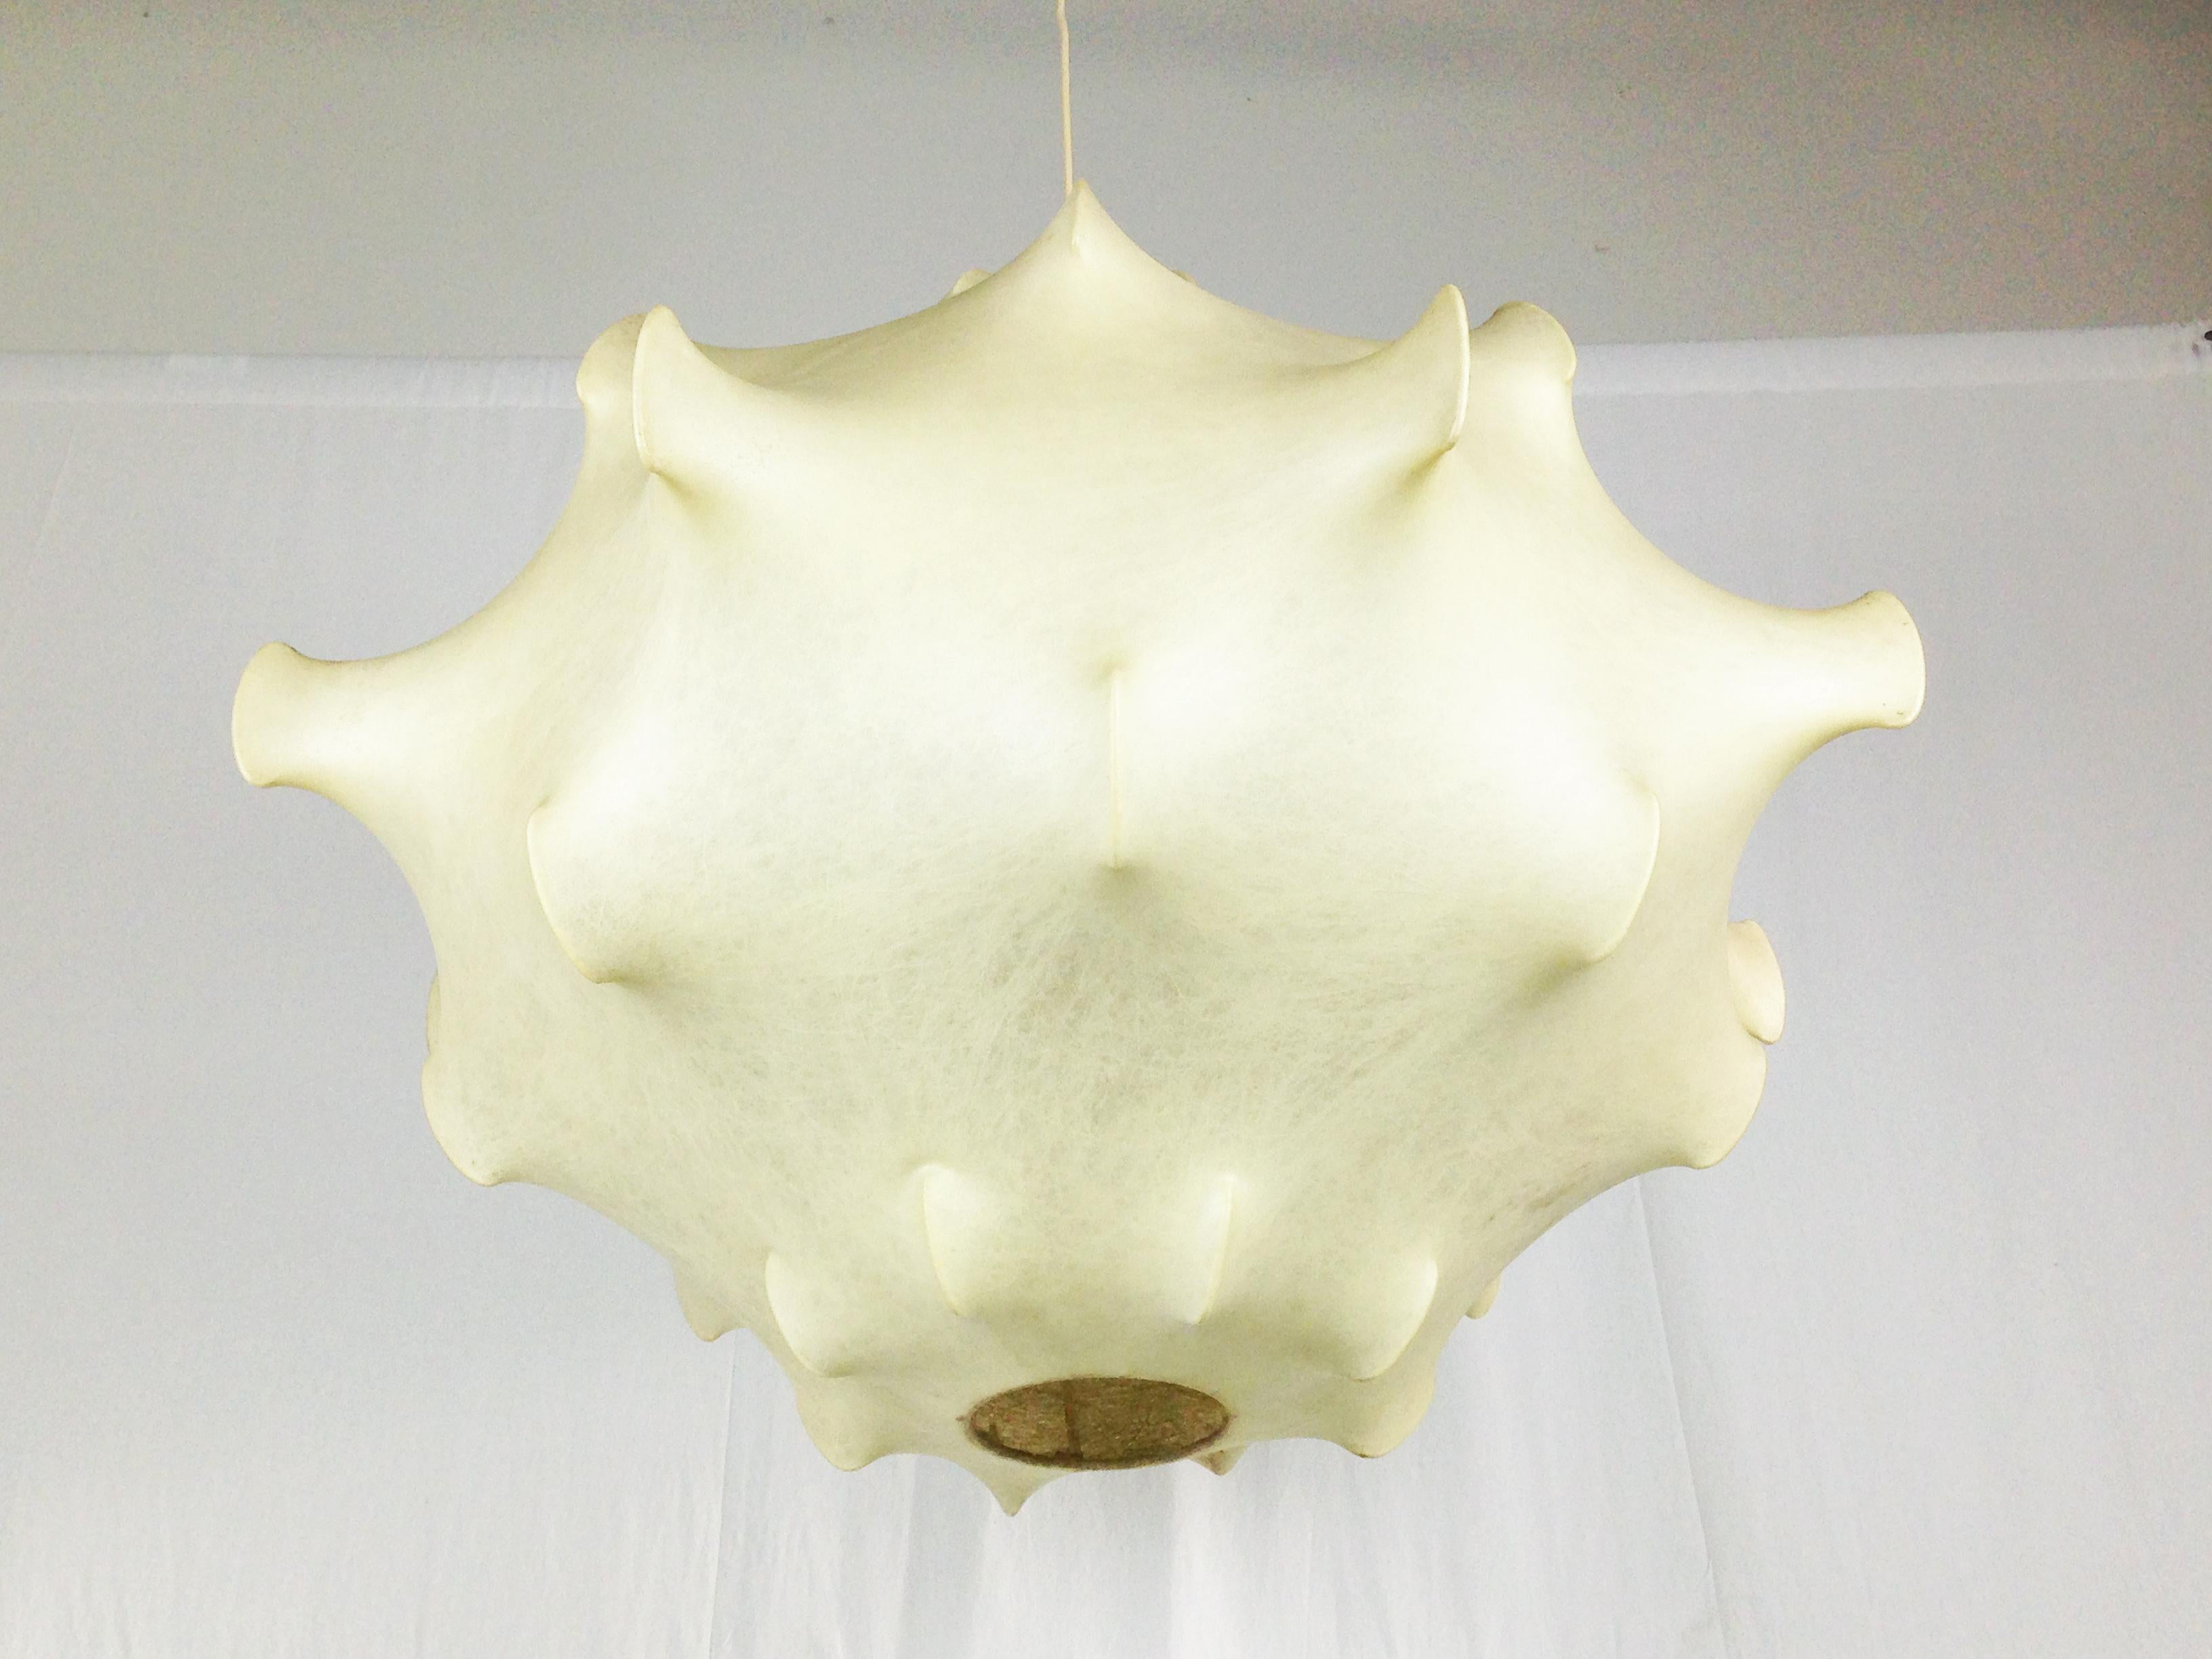 This vintage taraxacum pendant lamp was designed by Castiglioni brothers (Achille, Pier Giacomo e Livio) and belongs to the early production period. Overall good condition. The cocoon covering is yellowed due to time and shows light defects on the